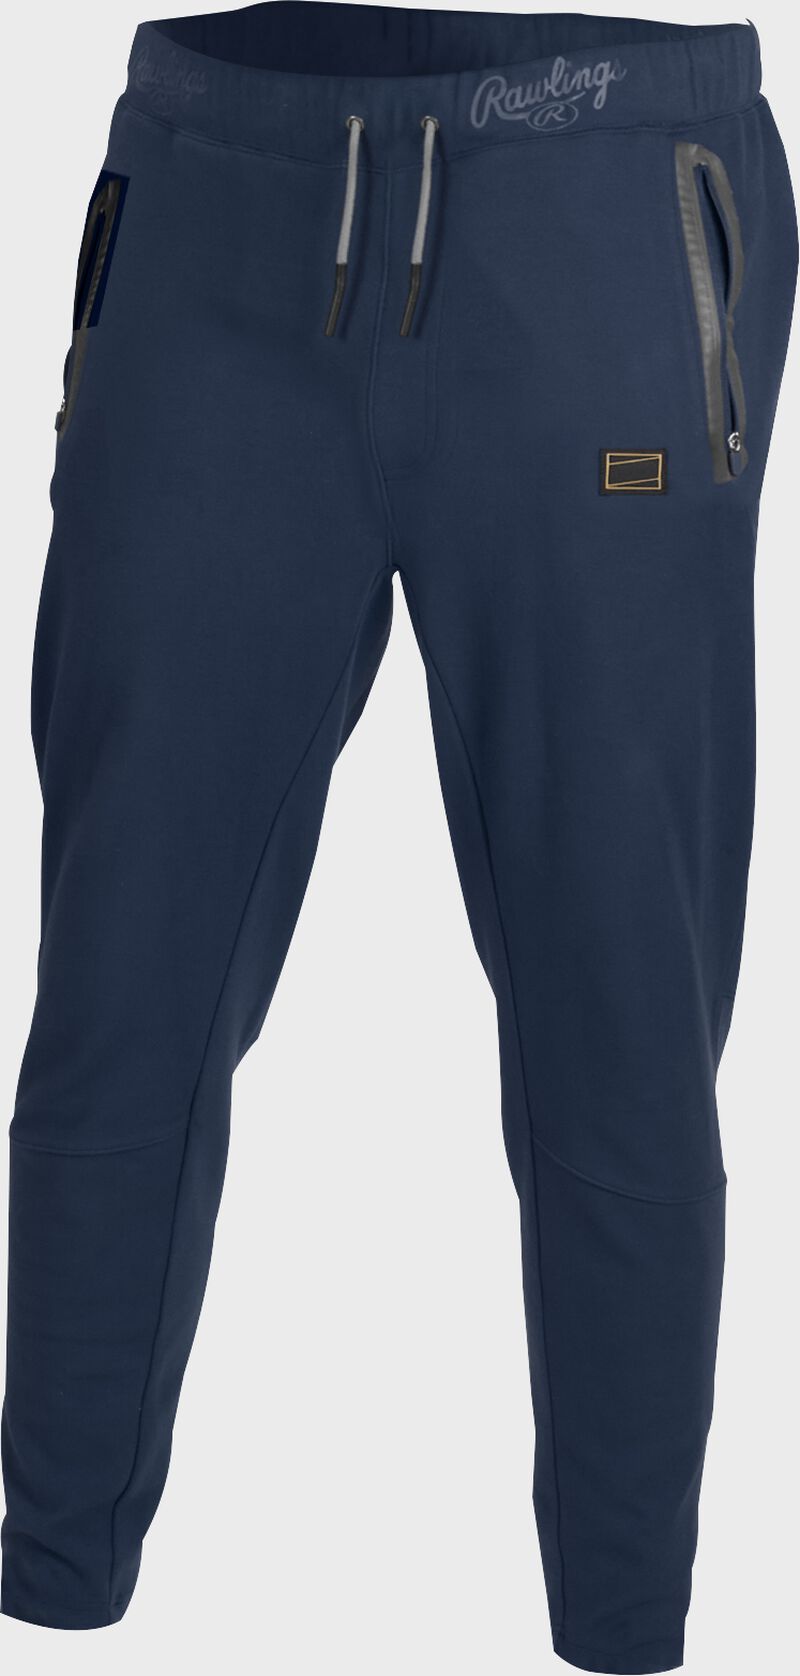 Navy Gold Collection jogger style pants with gray draw strings - SKU: GCJOG-N loading=